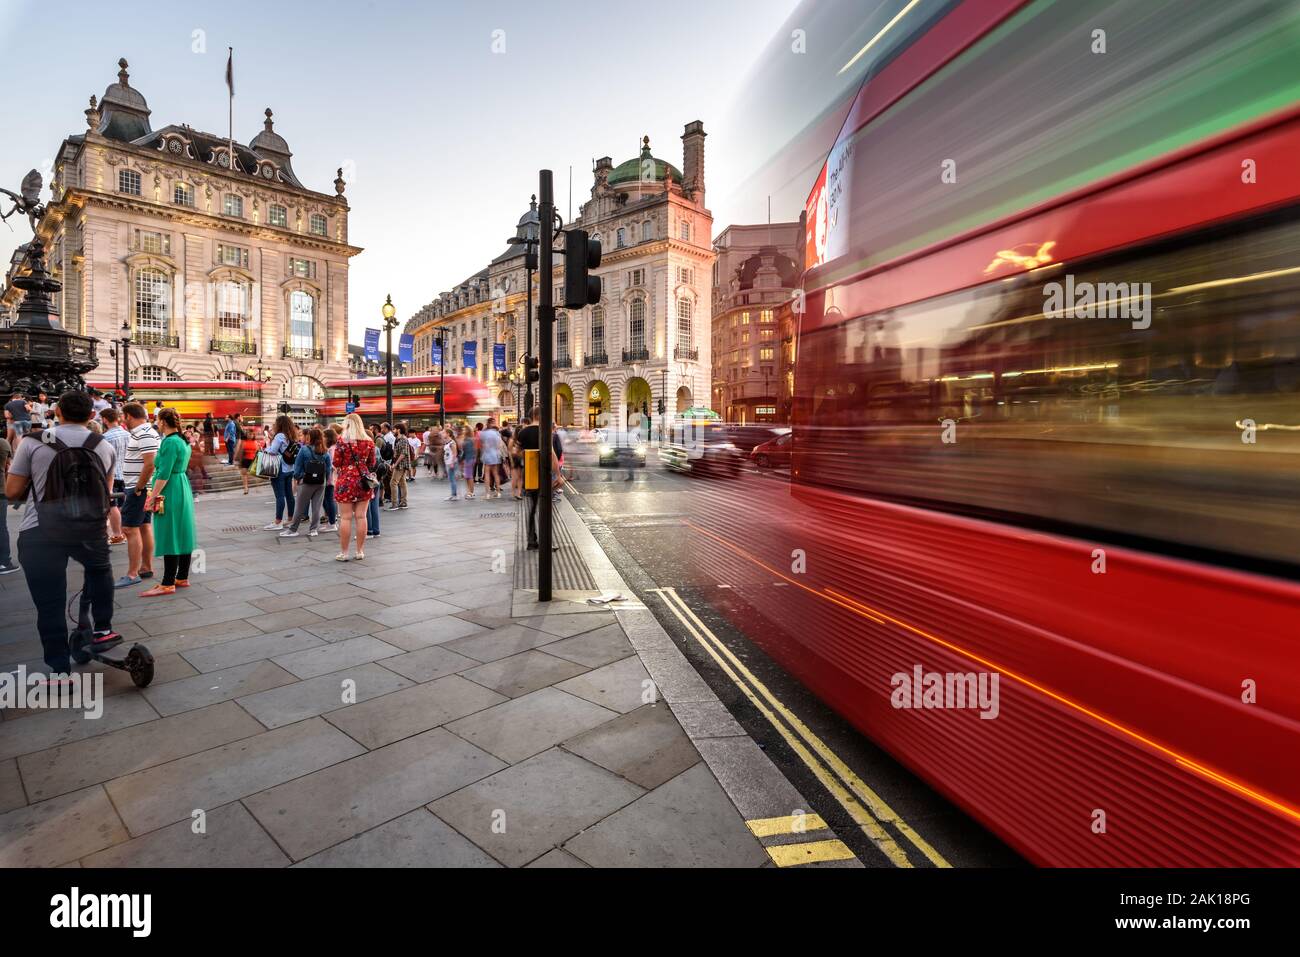 LONDON, ENGLAND - Juni 29th, 2018 - Rote Doppeldecker-Bus durch Piccadilly Circus - London vorbei. Stockfoto